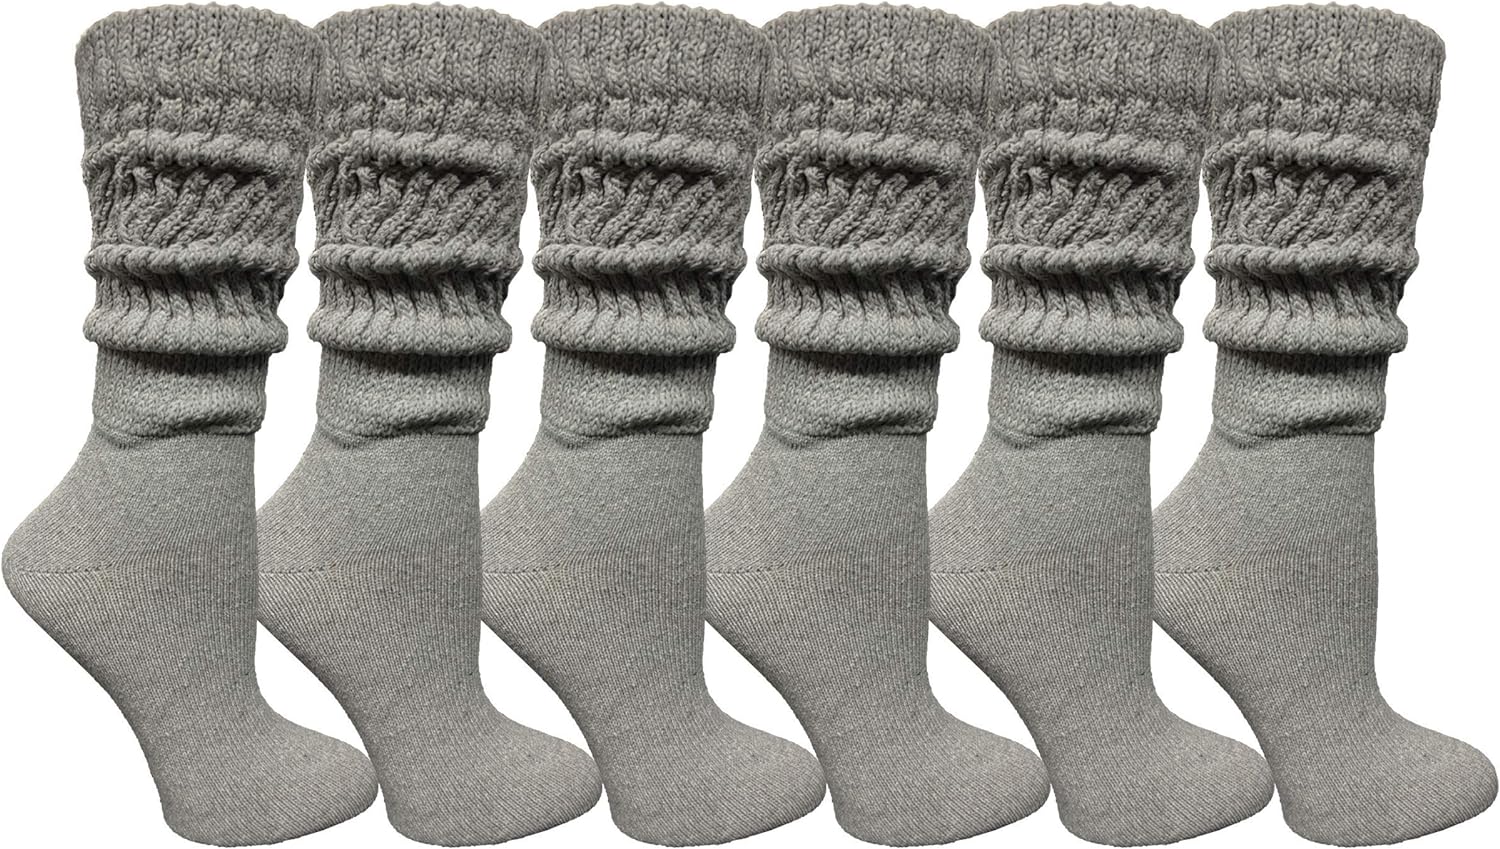 Yacht & Smith Slouch Socks for Women, Extra Slouch Ladies Cotton Boot Socks